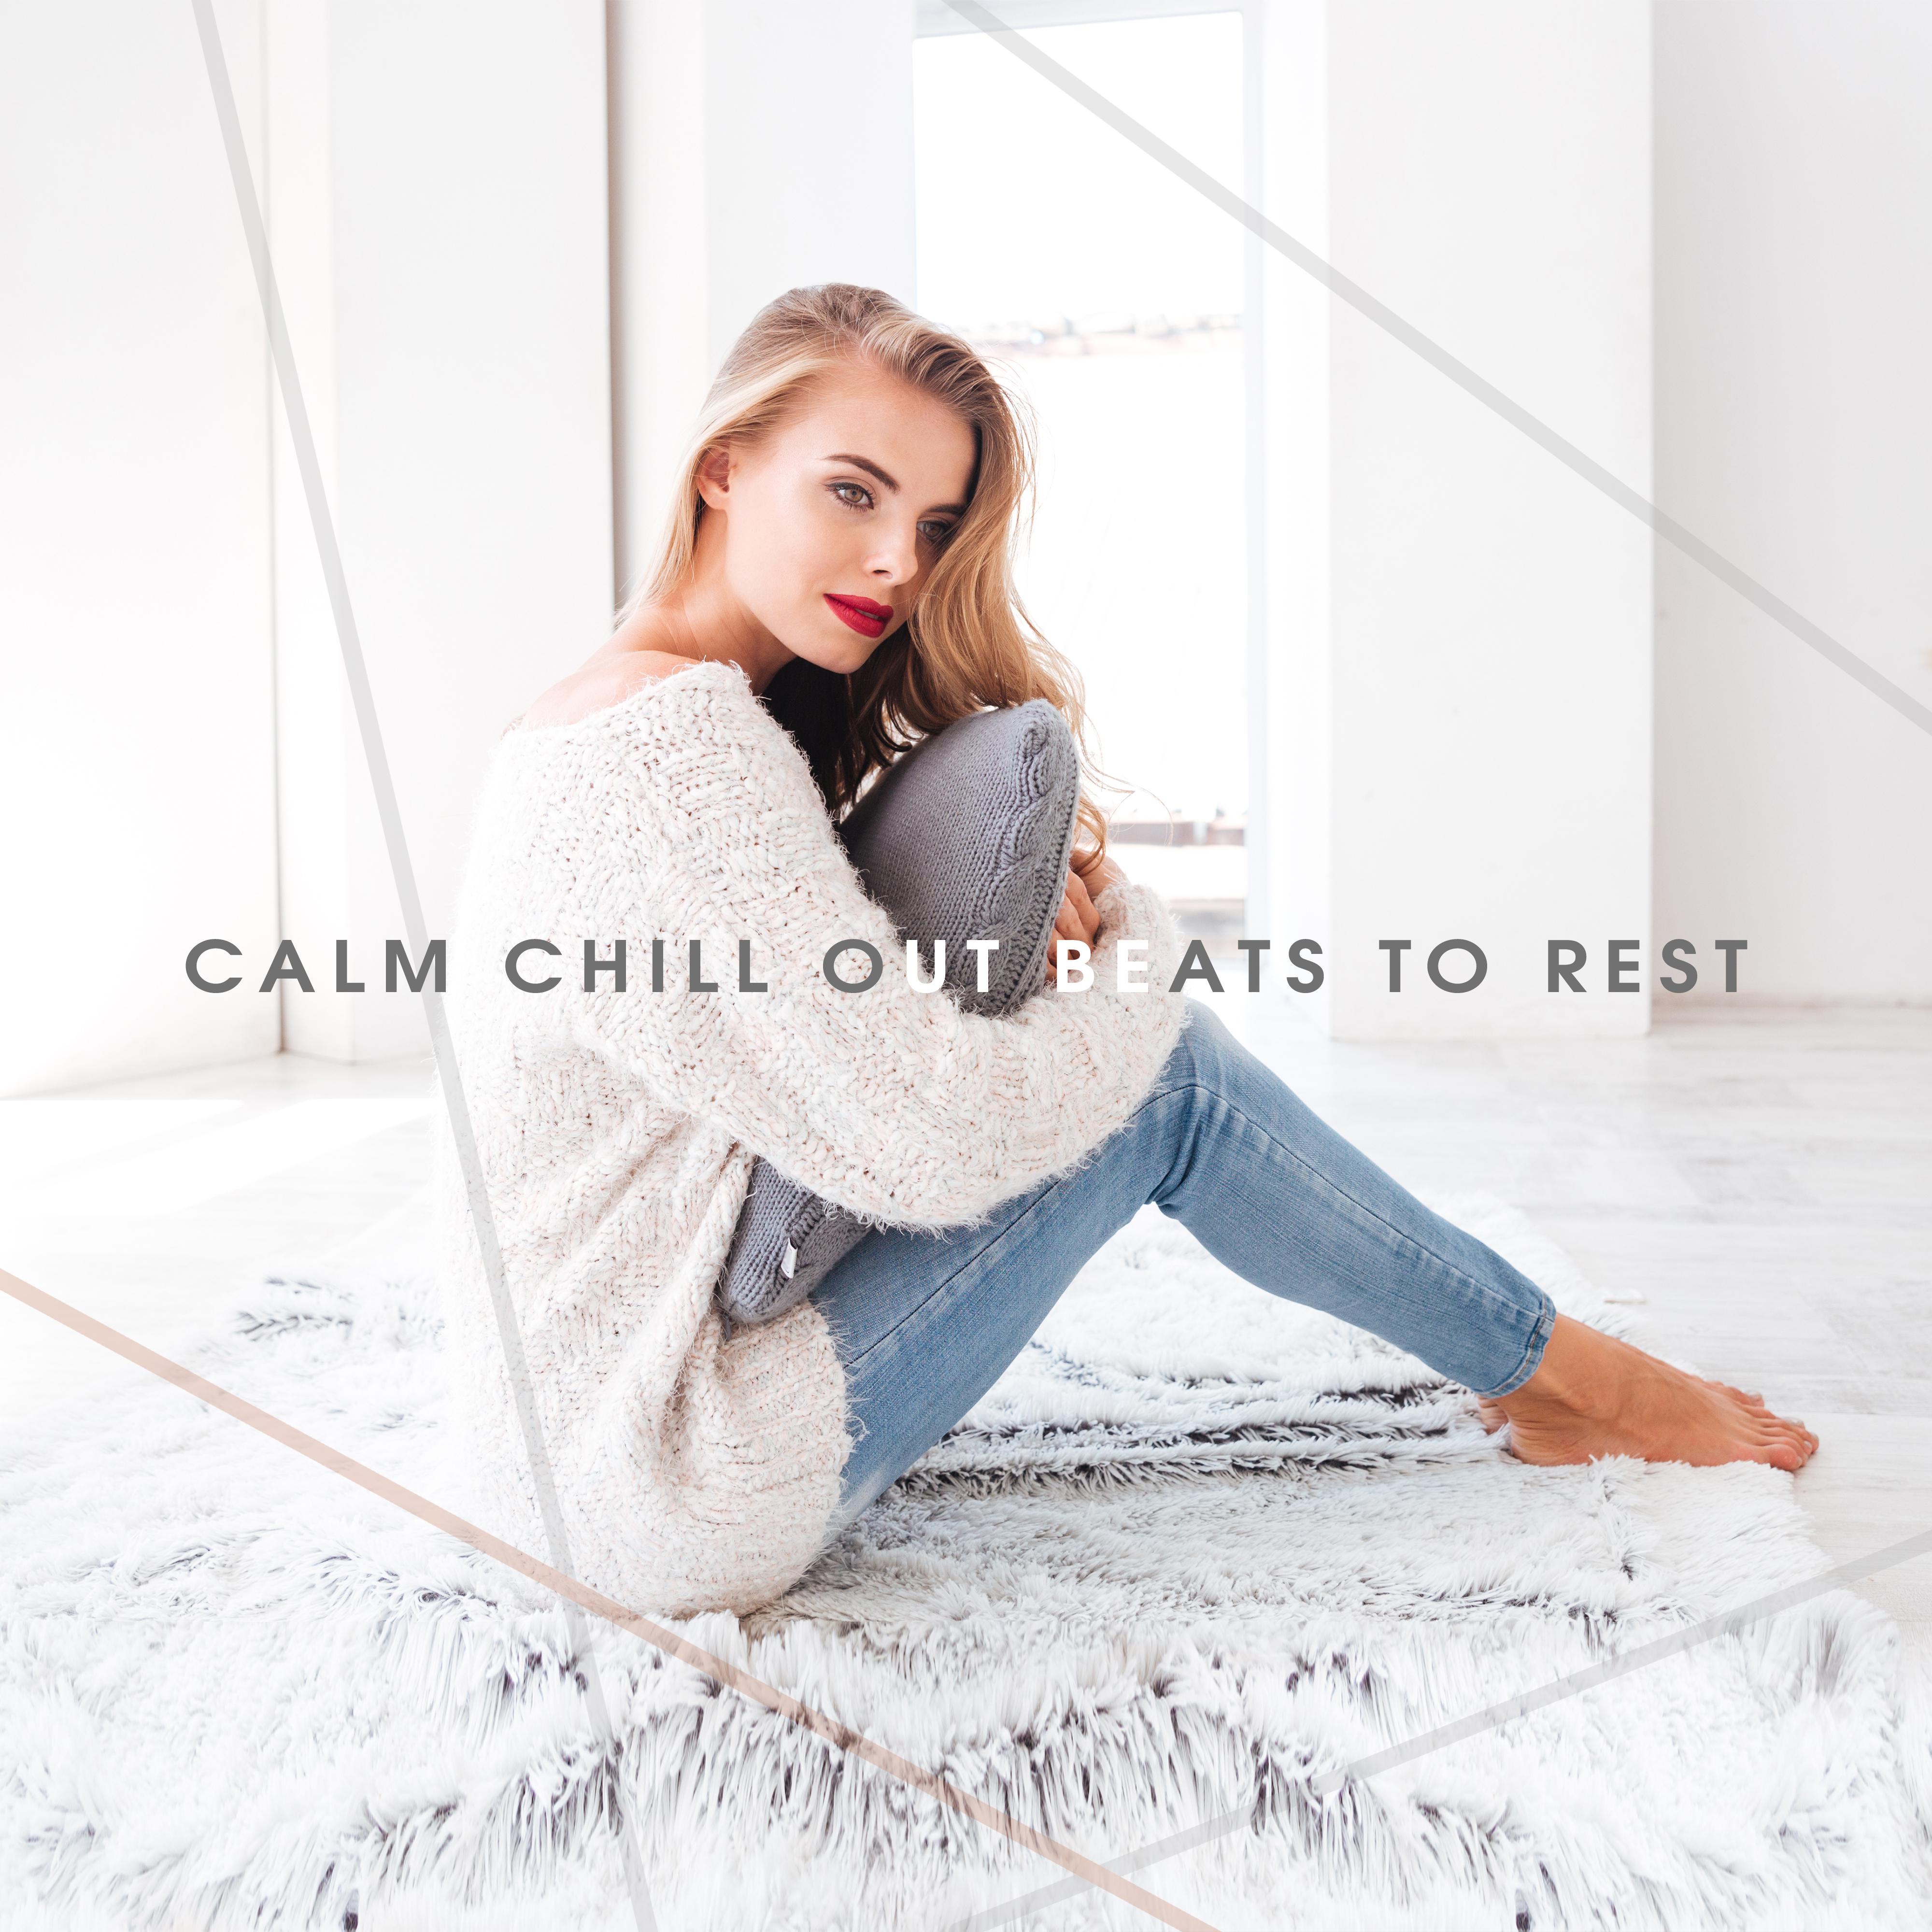 Calm Chill Out Beats to Rest – Summer Beach Lounge, Relaxing Melodies, Stress Relief, Peaceful Music, Holiday Sounds